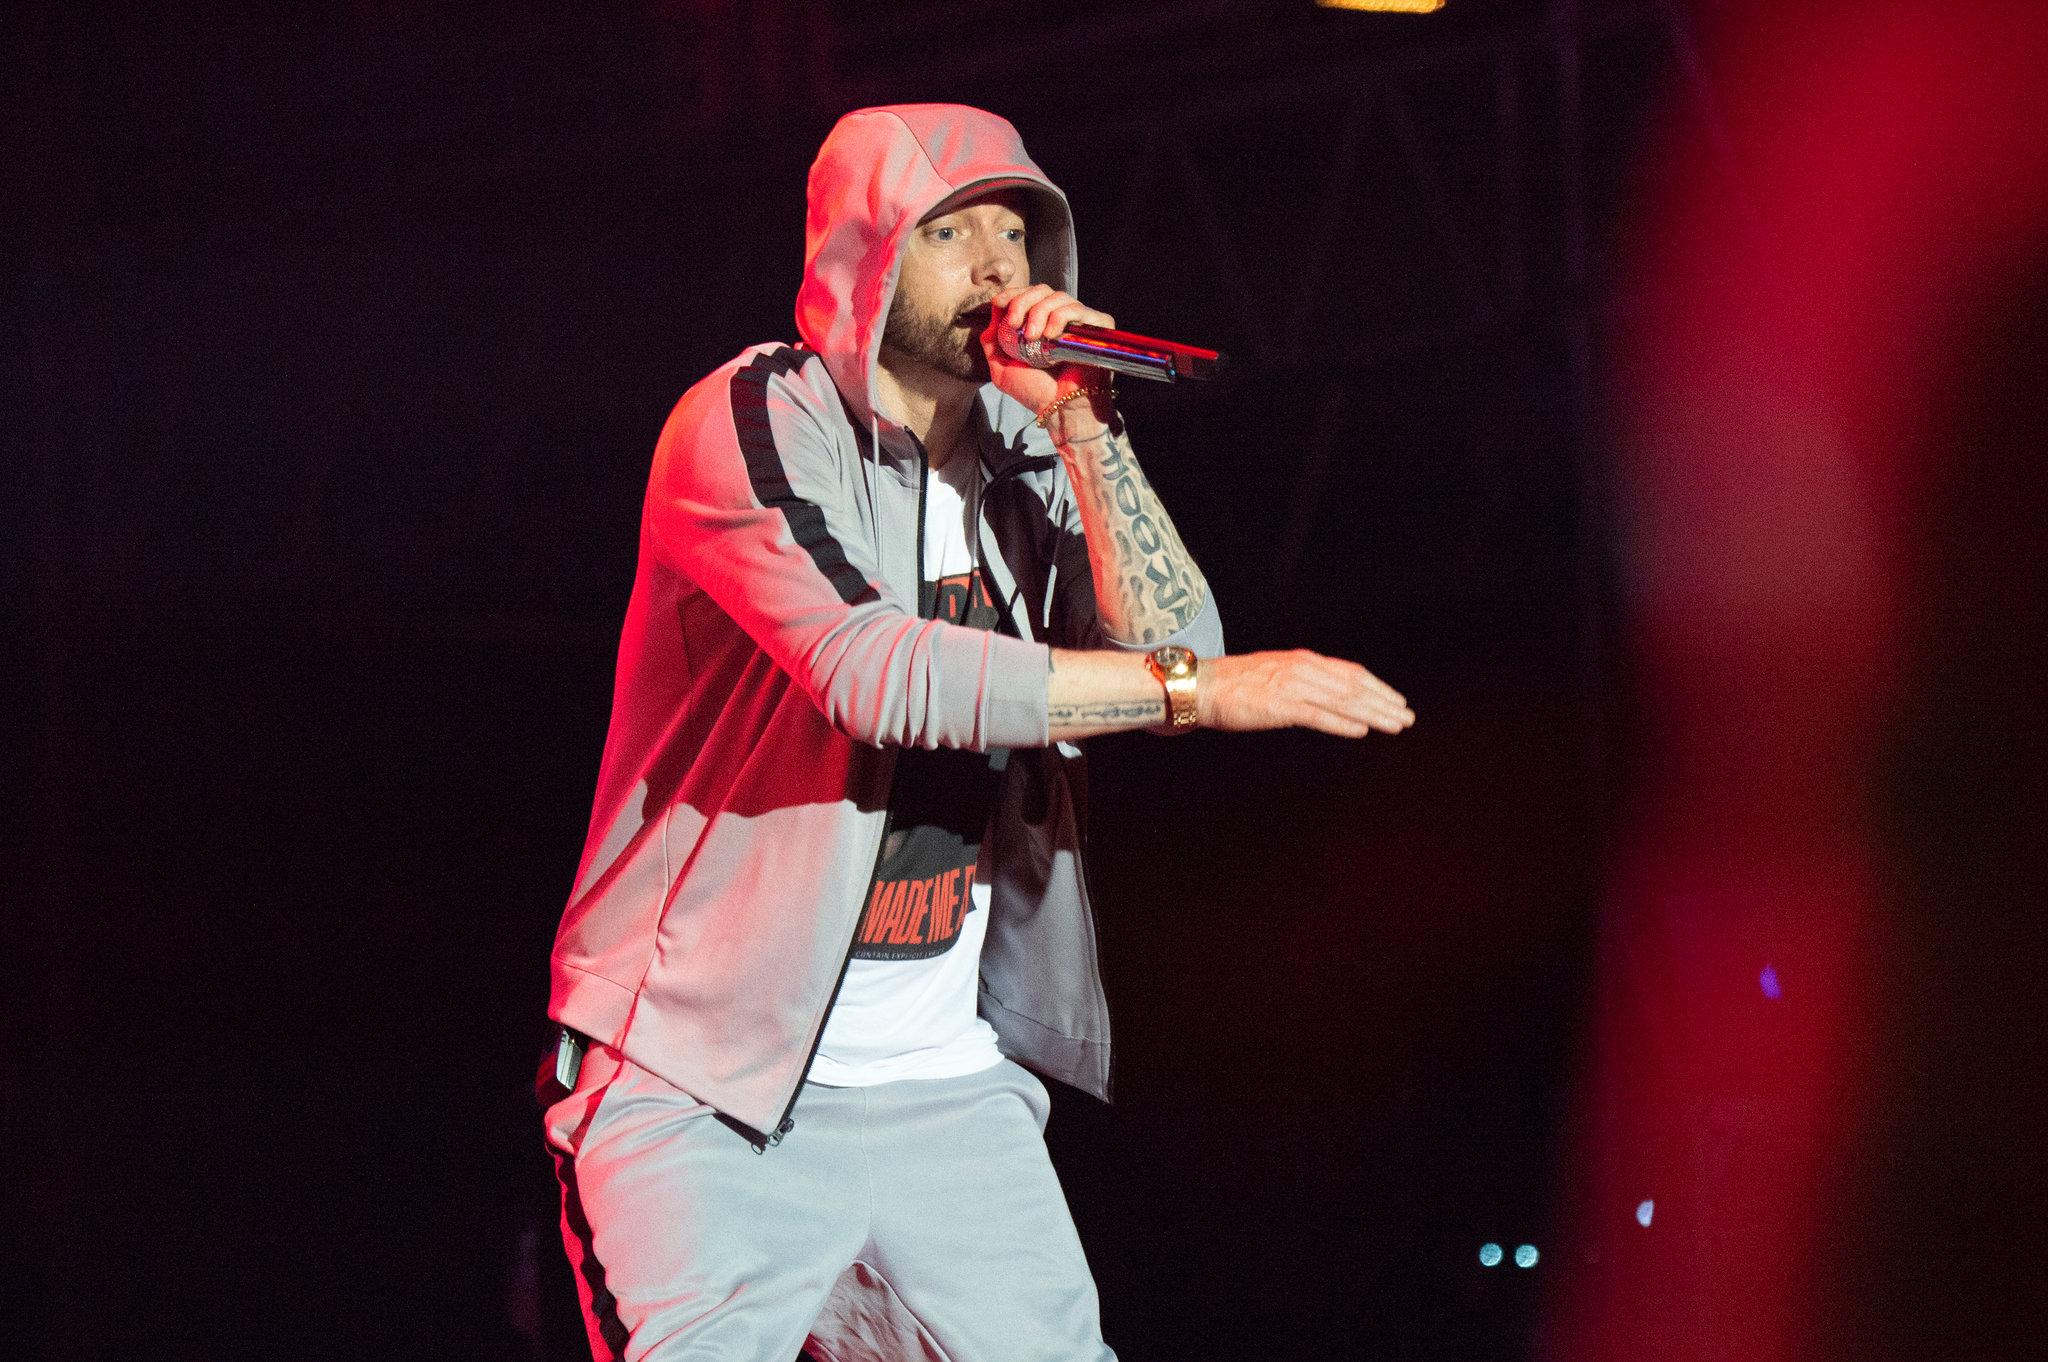 Eminem Faces Backlash Over Lyrics About Deadly Attack At Ariana